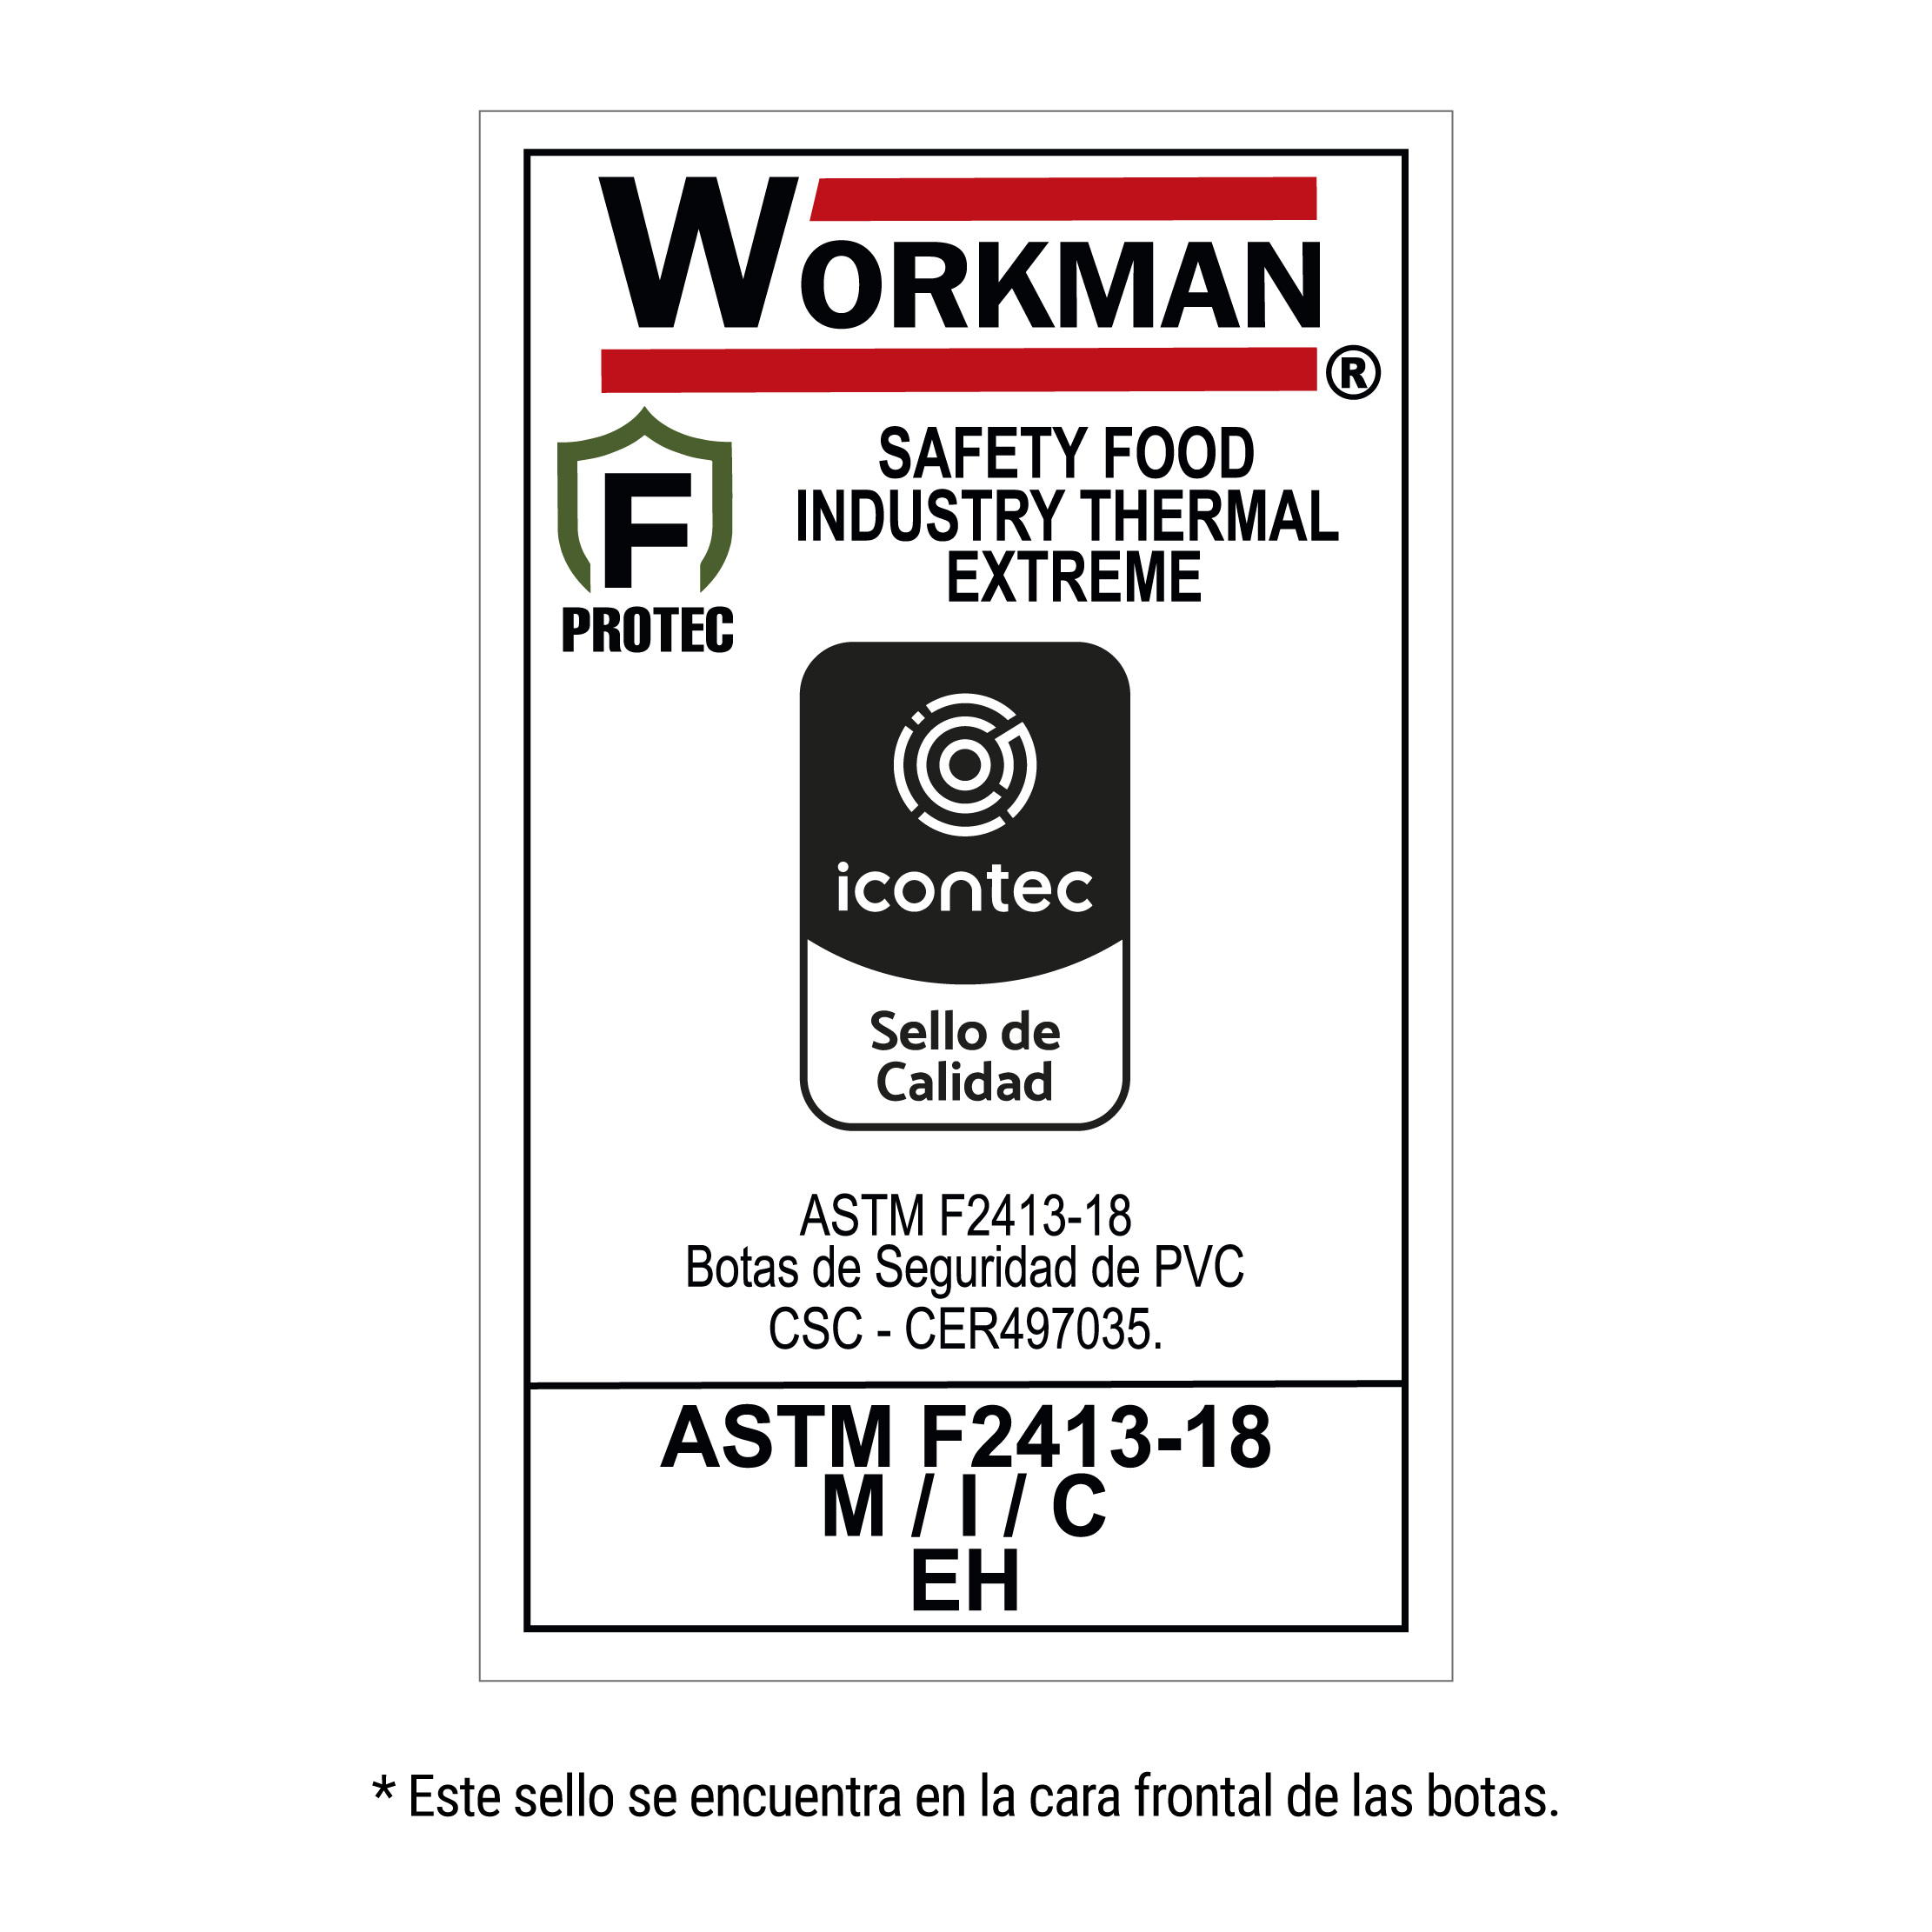 Workman Safety Food Industry Extreme Thermal Amarilla